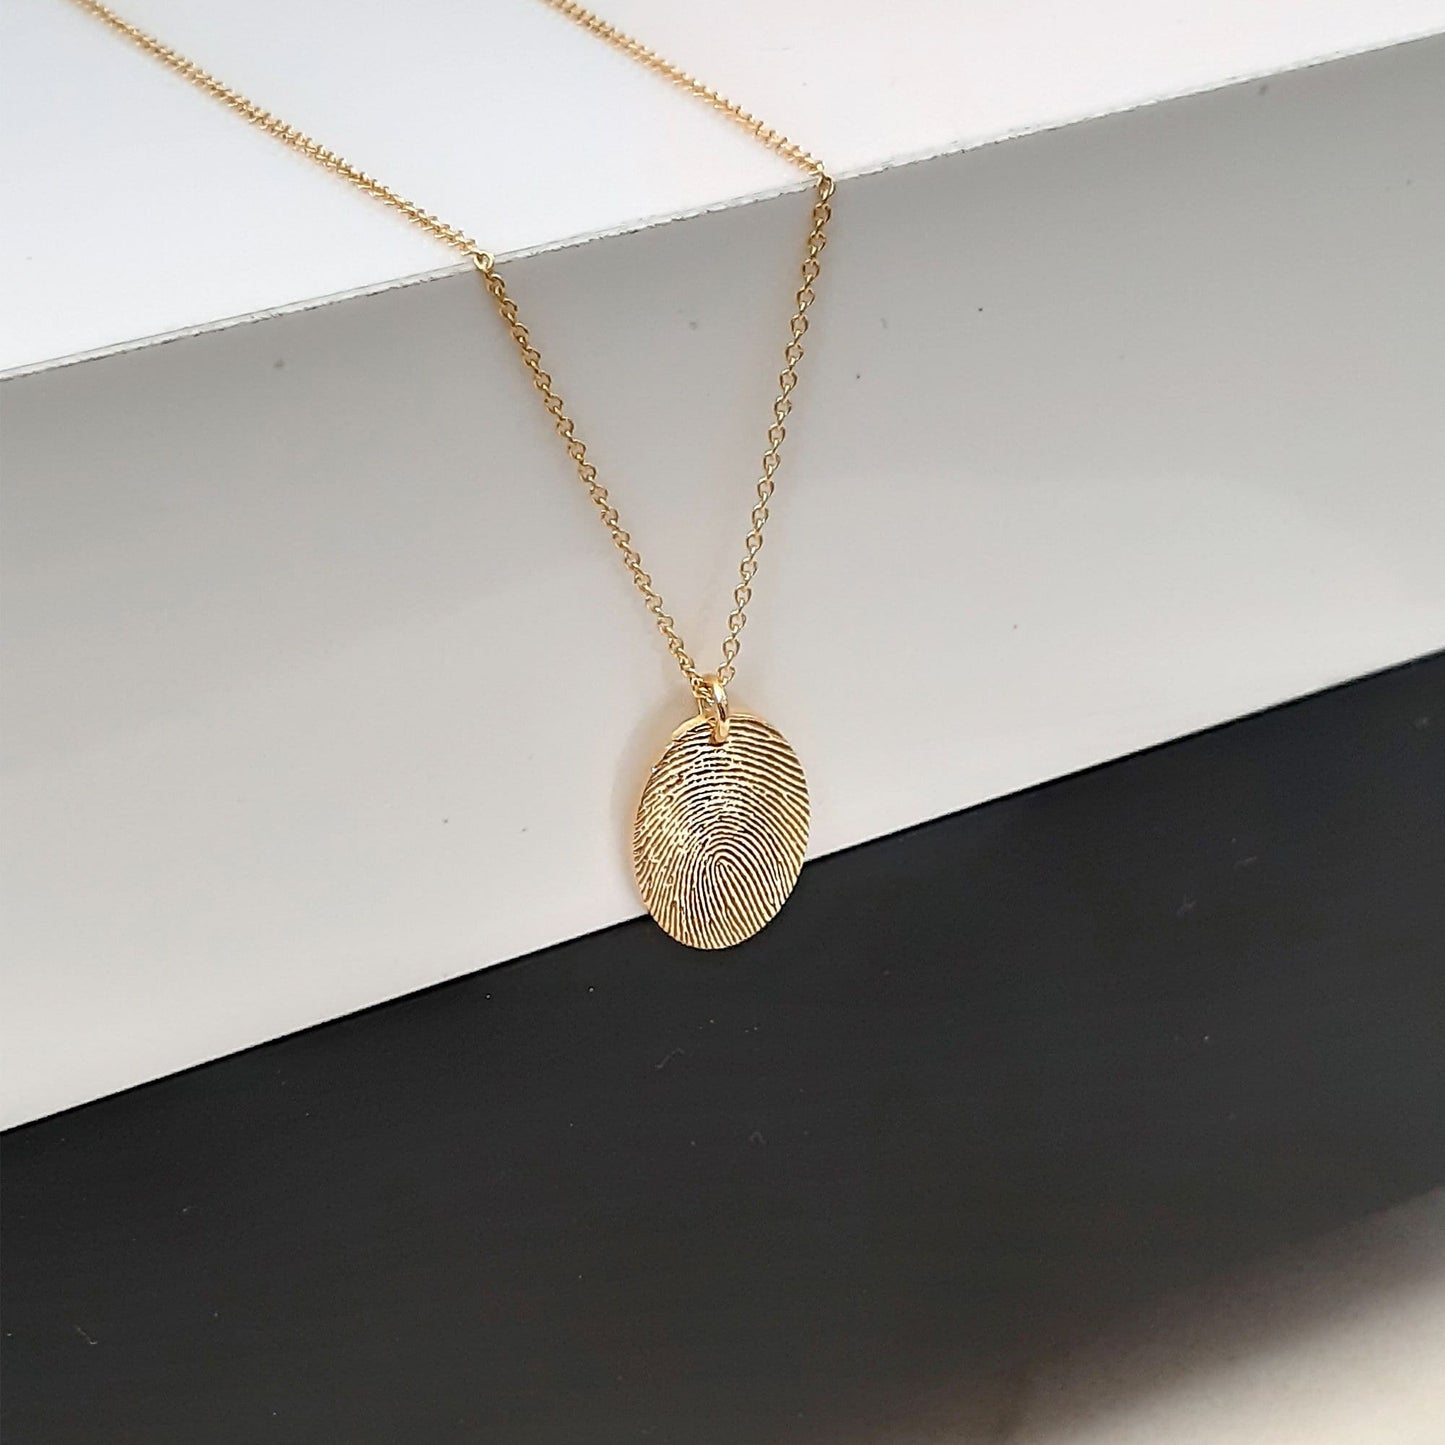 Fingerprint oval pendant • Personalized 14k solid gold • Actual Handwriting necklace • Real gold Memorial Jewelry • Grandma Gift